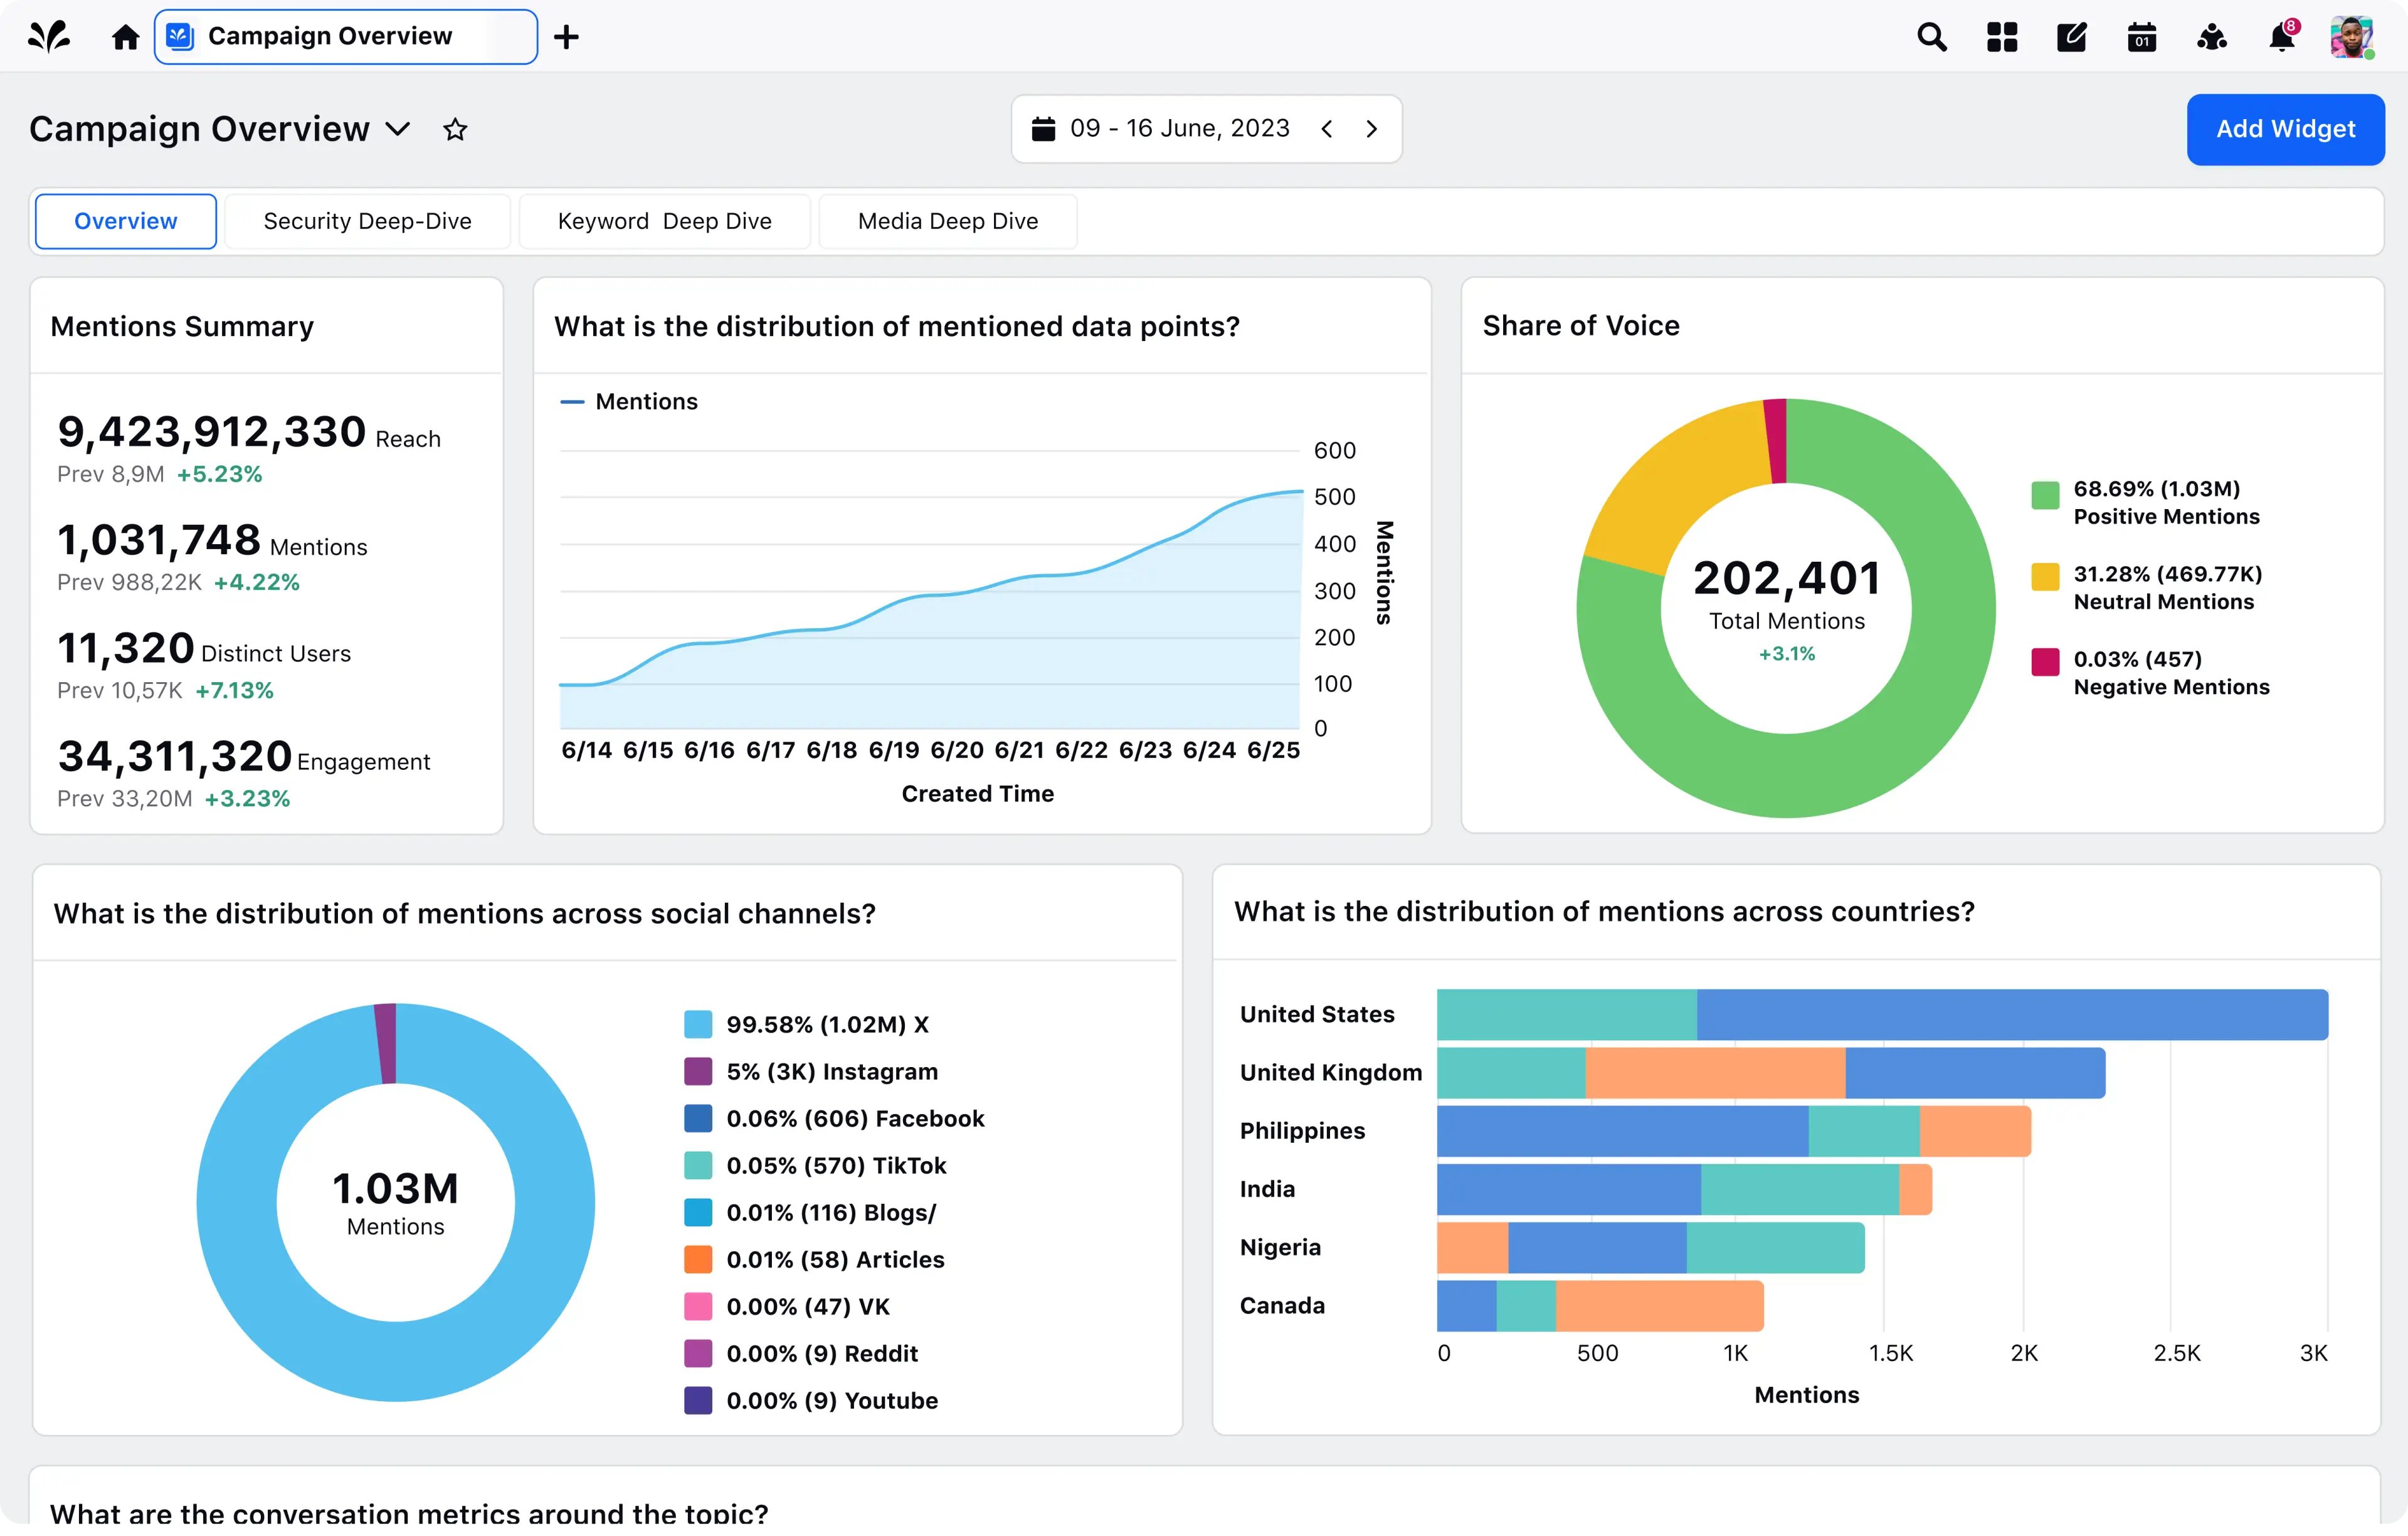 Real-time customer insights powered by Sprinklr Social